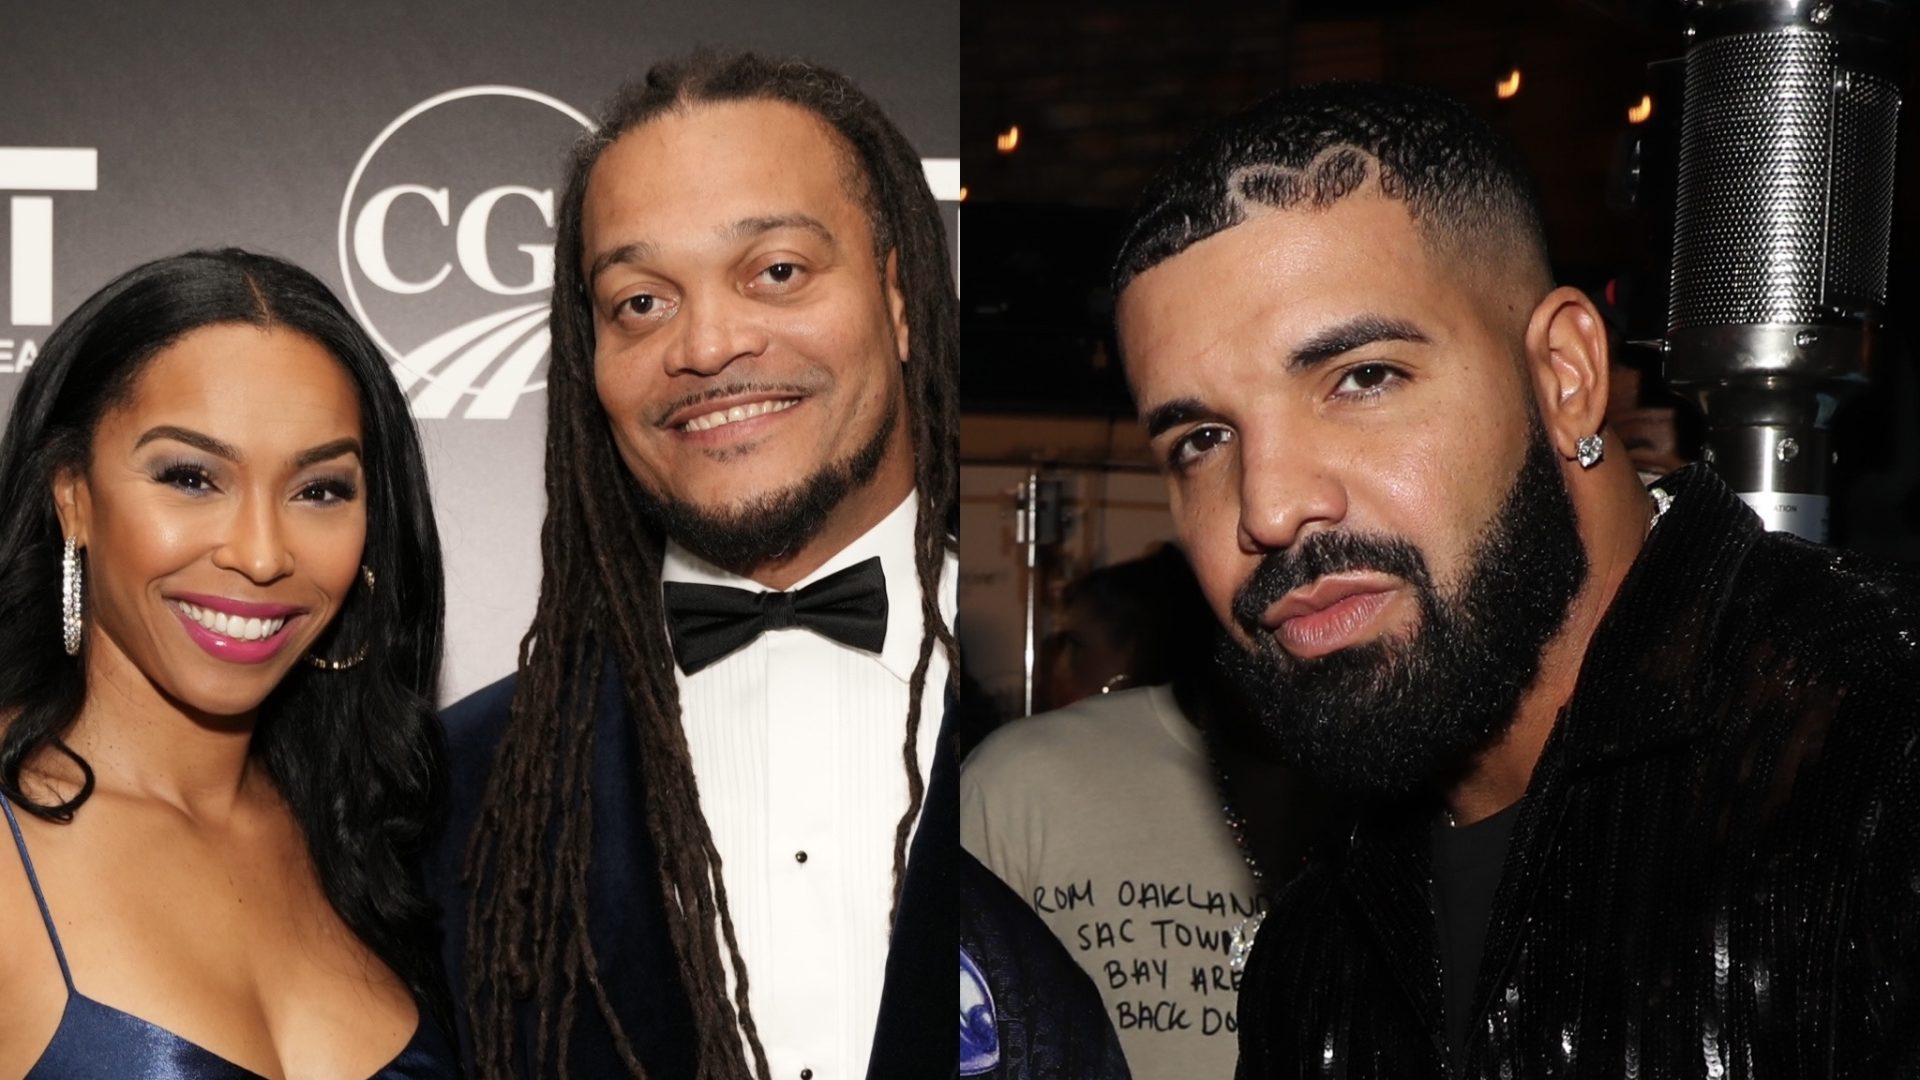 Whew! Channing Crowder Reacts After Drake Goes Viral For Complimenting His Wife (WATCH)